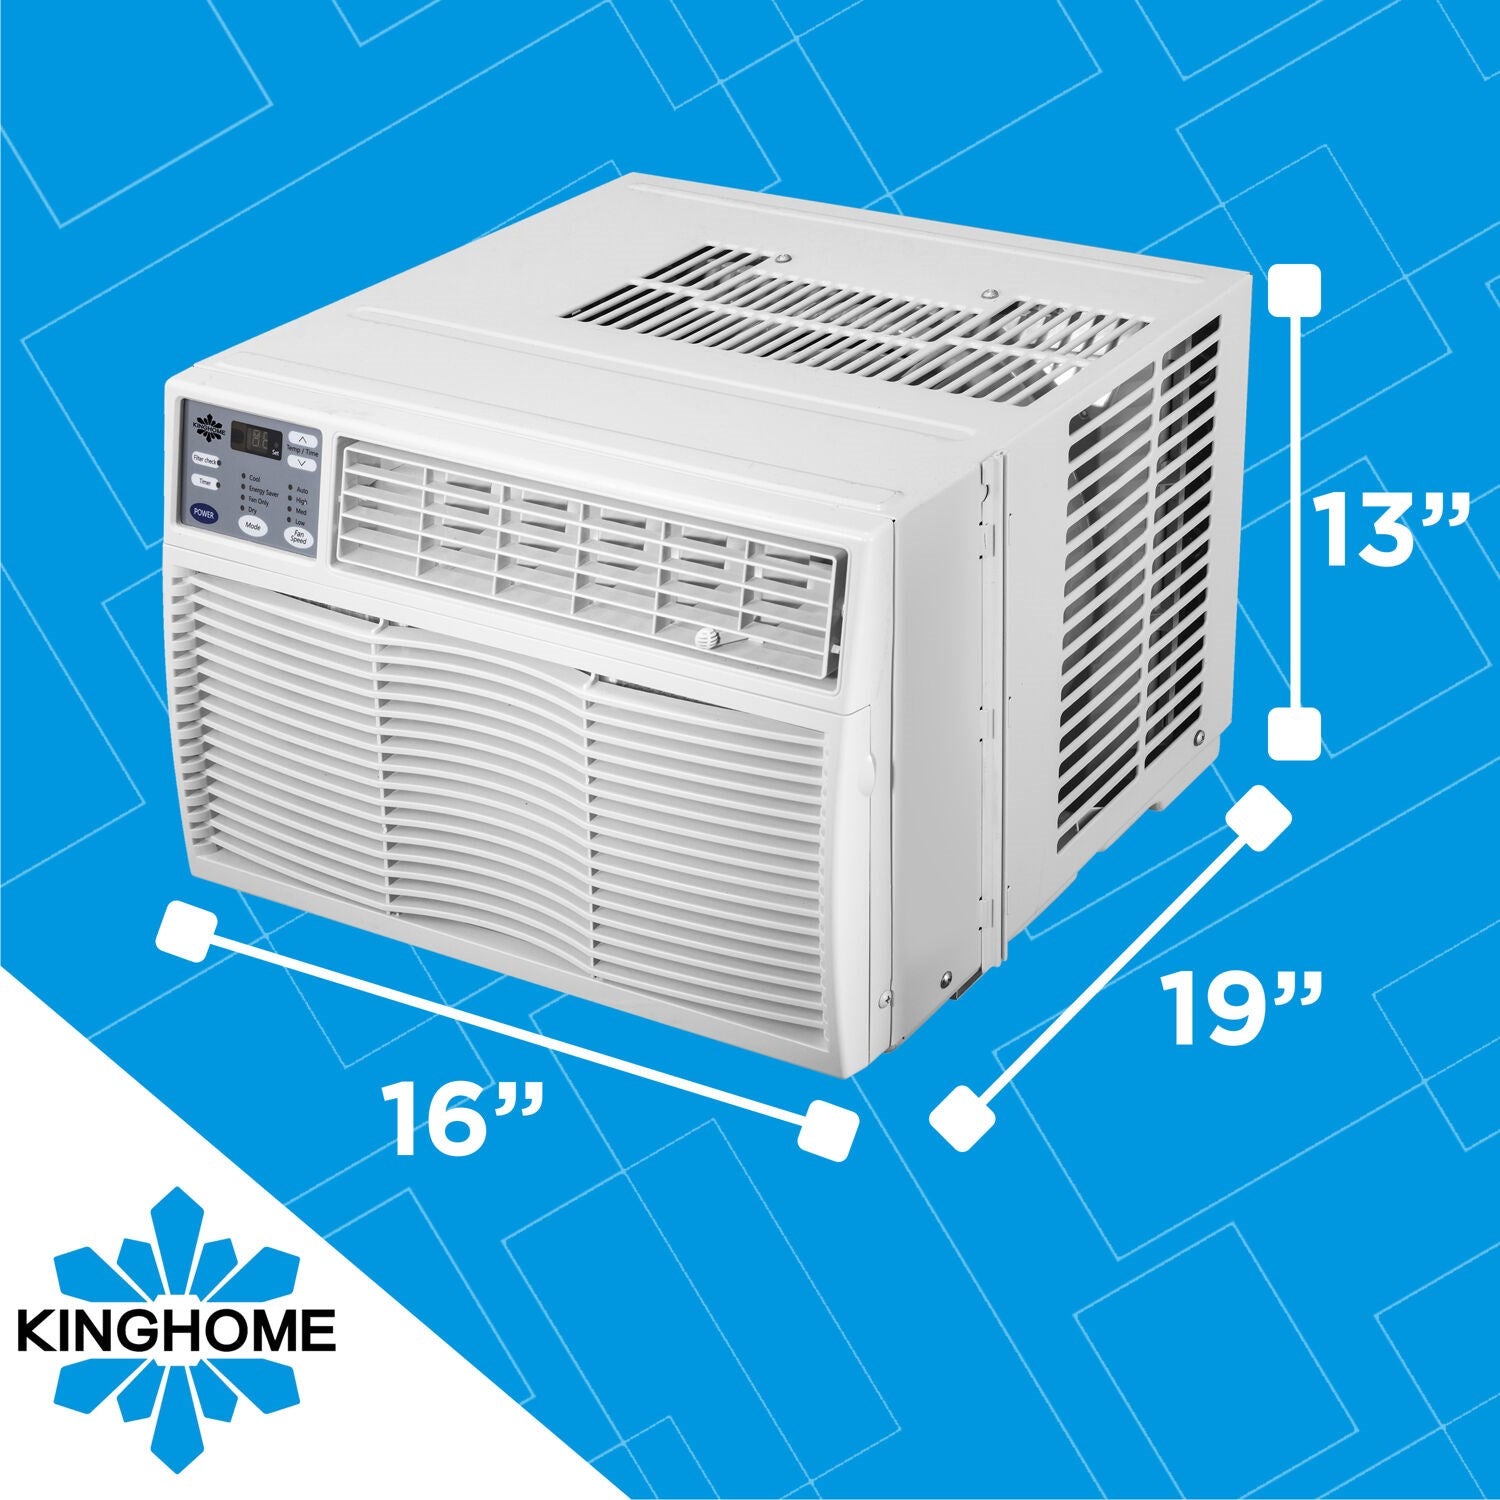 Kinghome - 6,000 BTU Window Air Conditioner with Electronic Controls, Energy Star | KHW06BTE